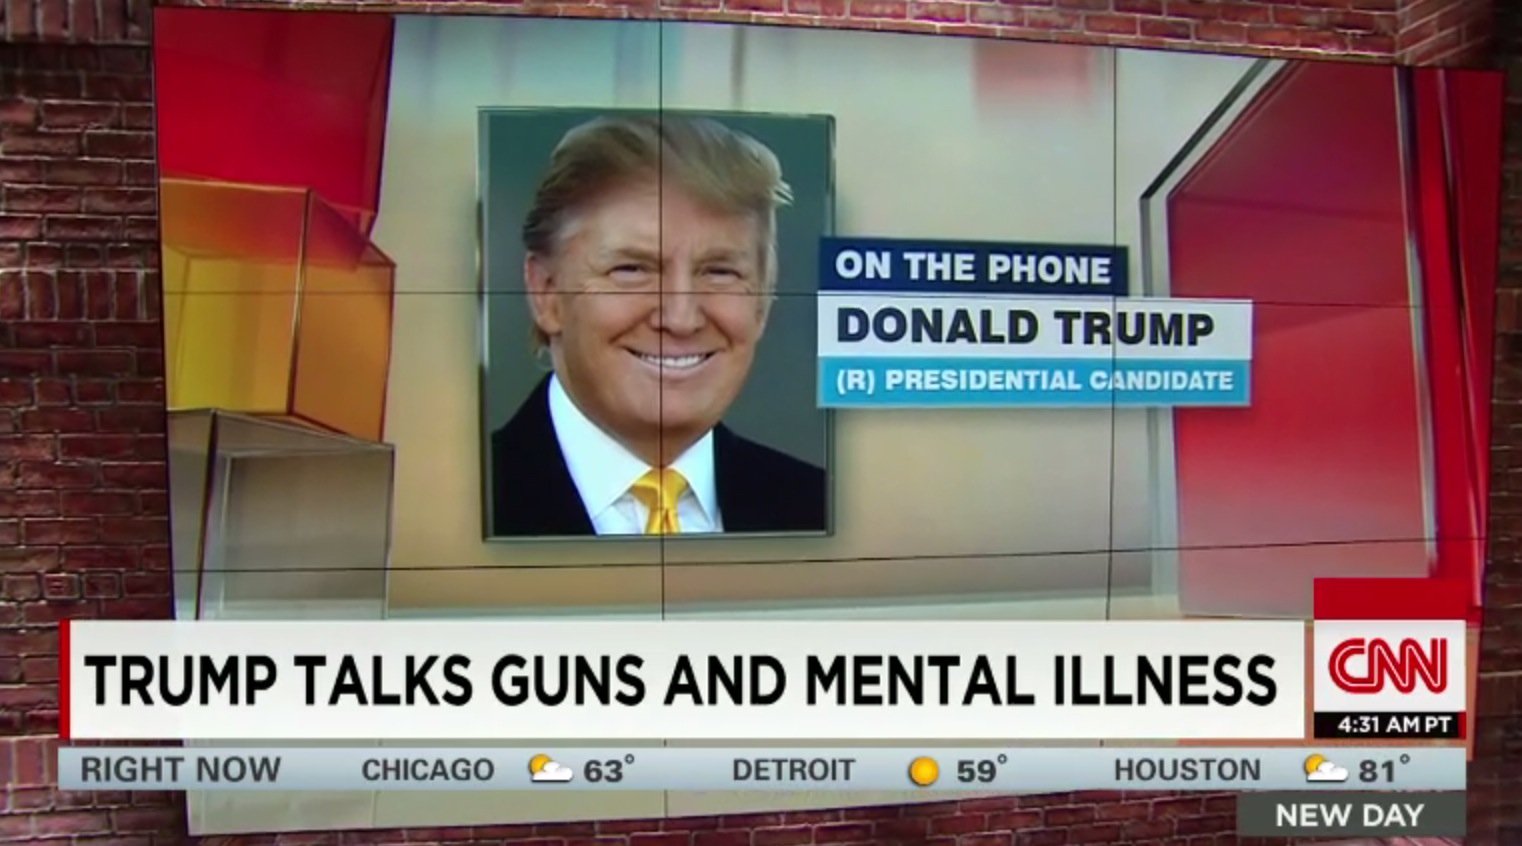 During a phone interview with CNN, Donald Trump said mental illness, not gun laws, are to blame for gun violence.